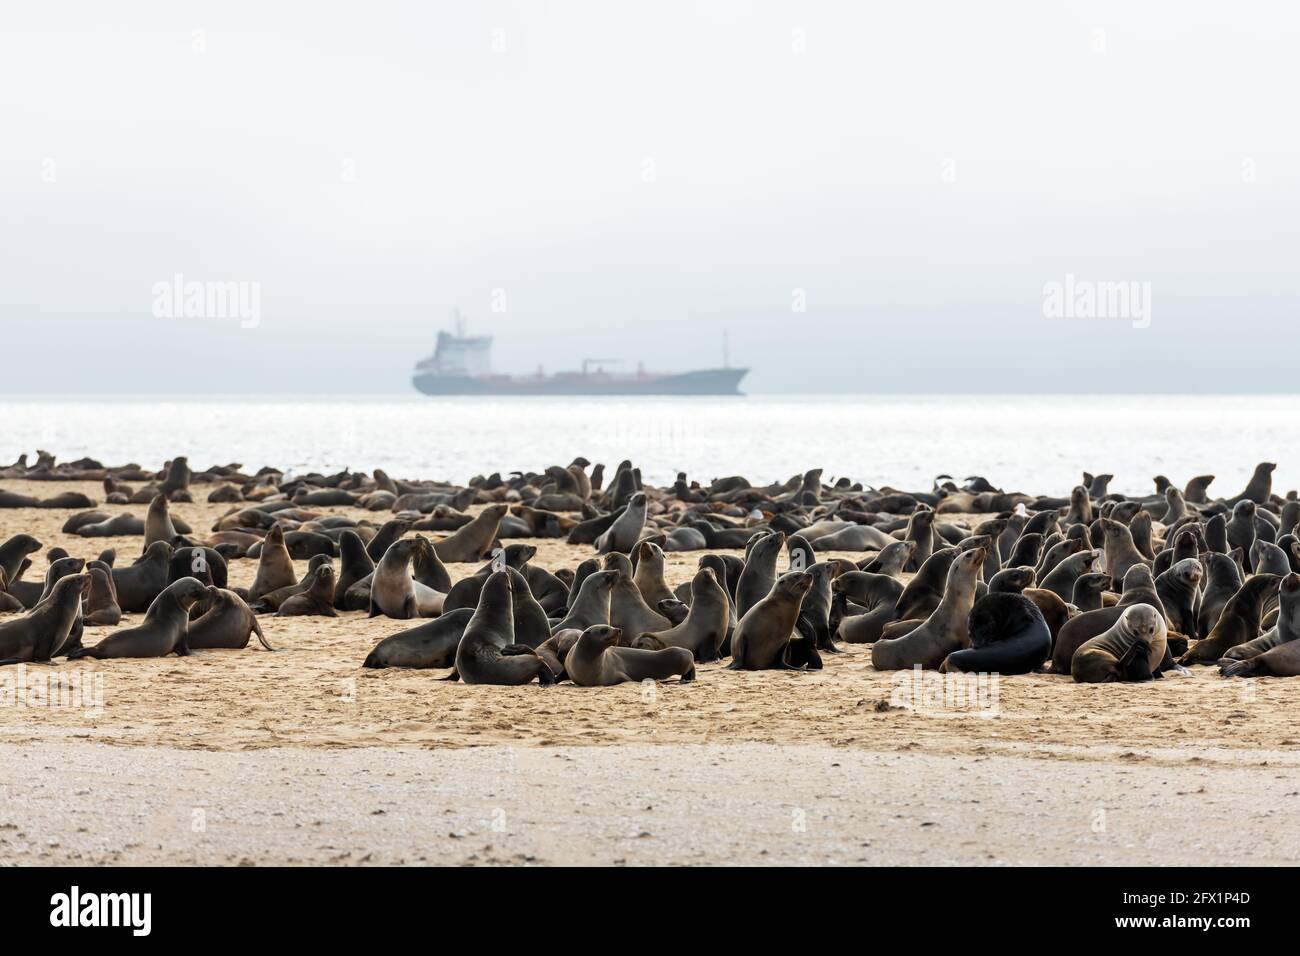 Fur seal colony enjoy the heat of the sun at the Walvis Bay near Swacopmund in Namibia, Africa. Wildlife photography Stock Photo